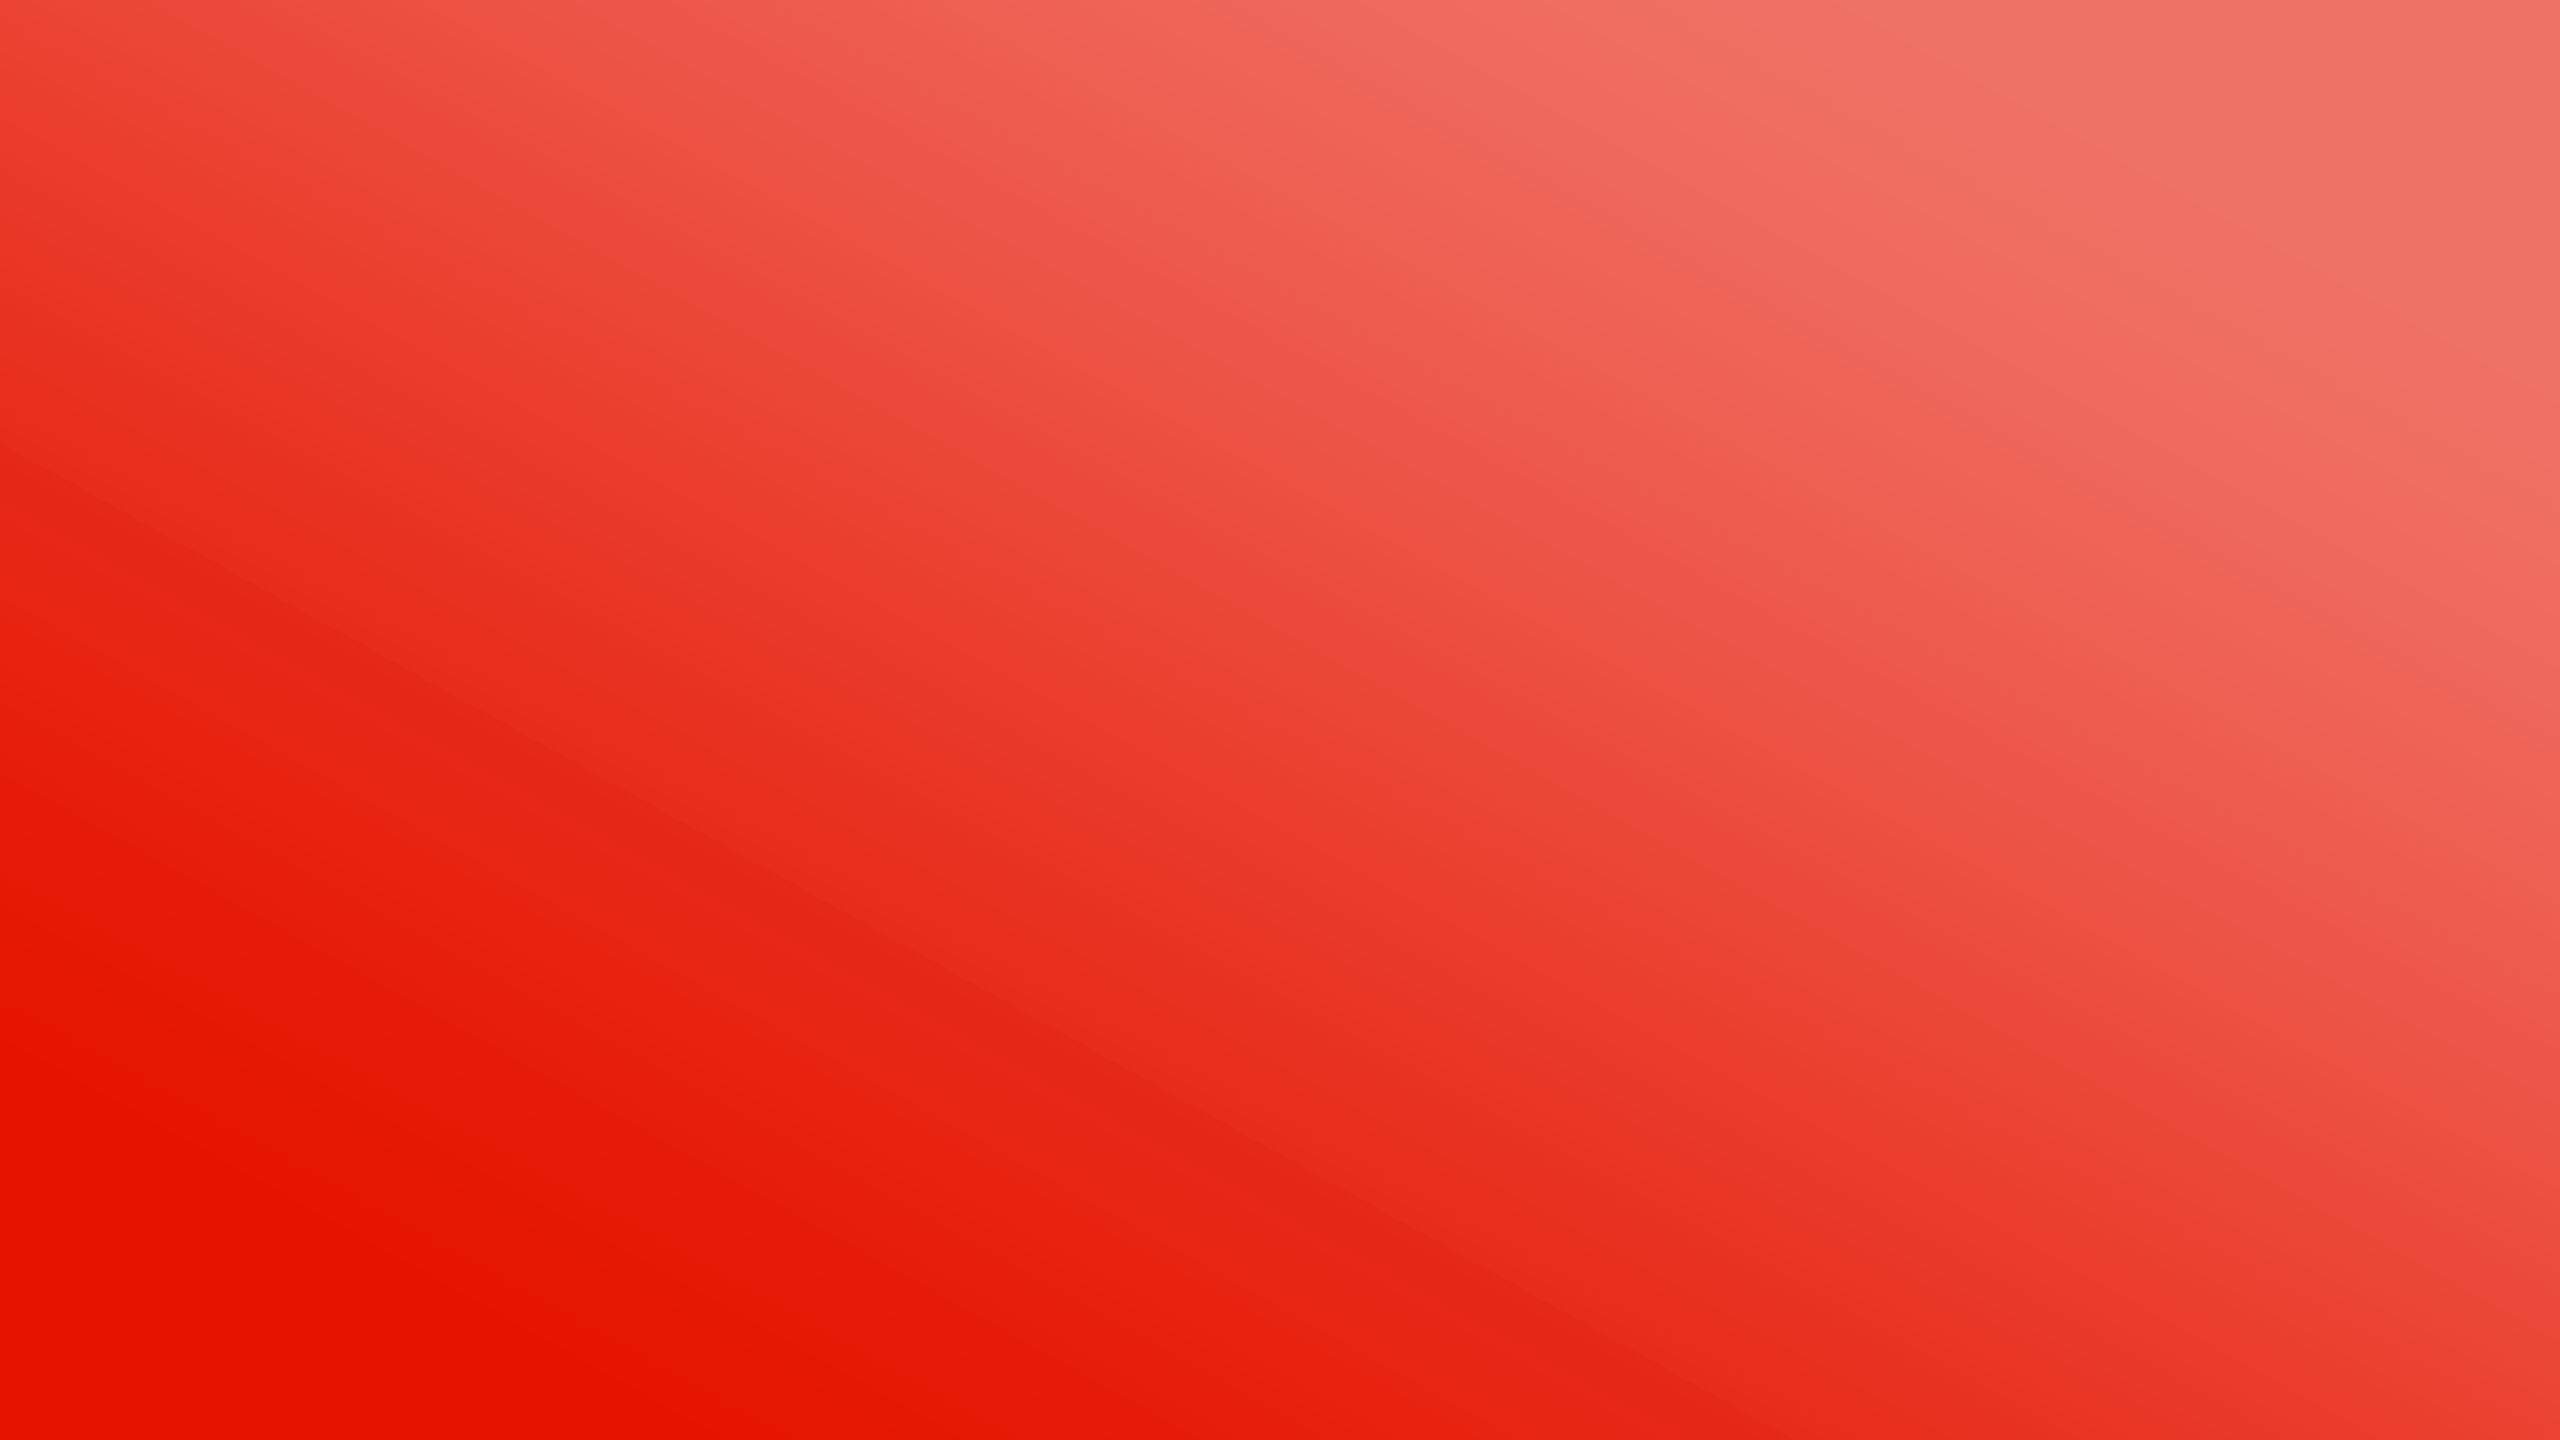 Download wallpaper 2560x1440 red solid light bright scarlet widescreen  169 hd background